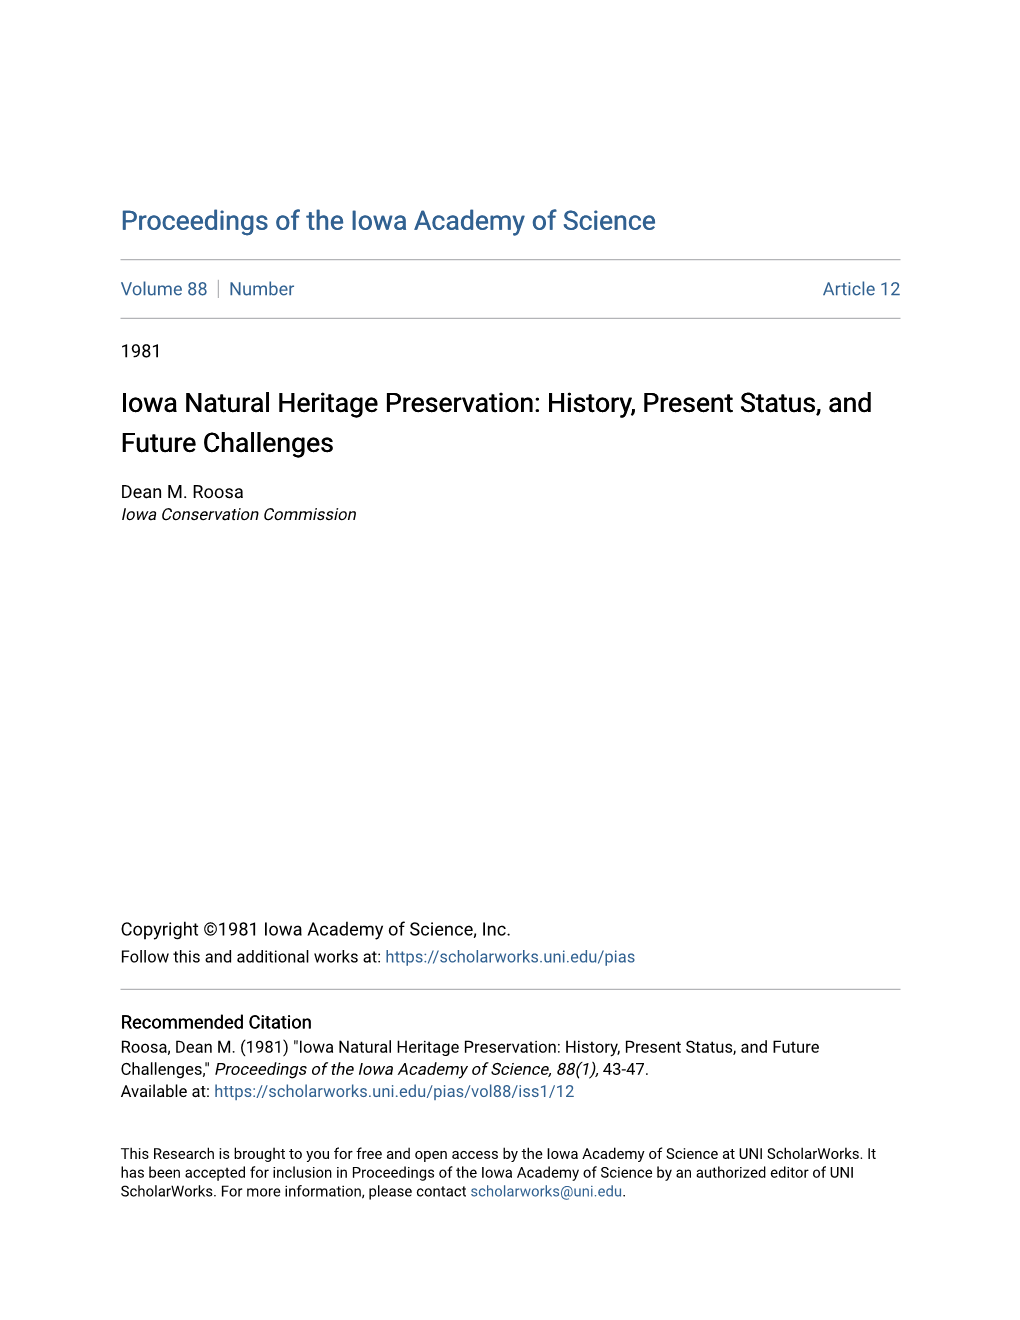 Iowa Natural Heritage Preservation: History, Present Status, and Future Challenges